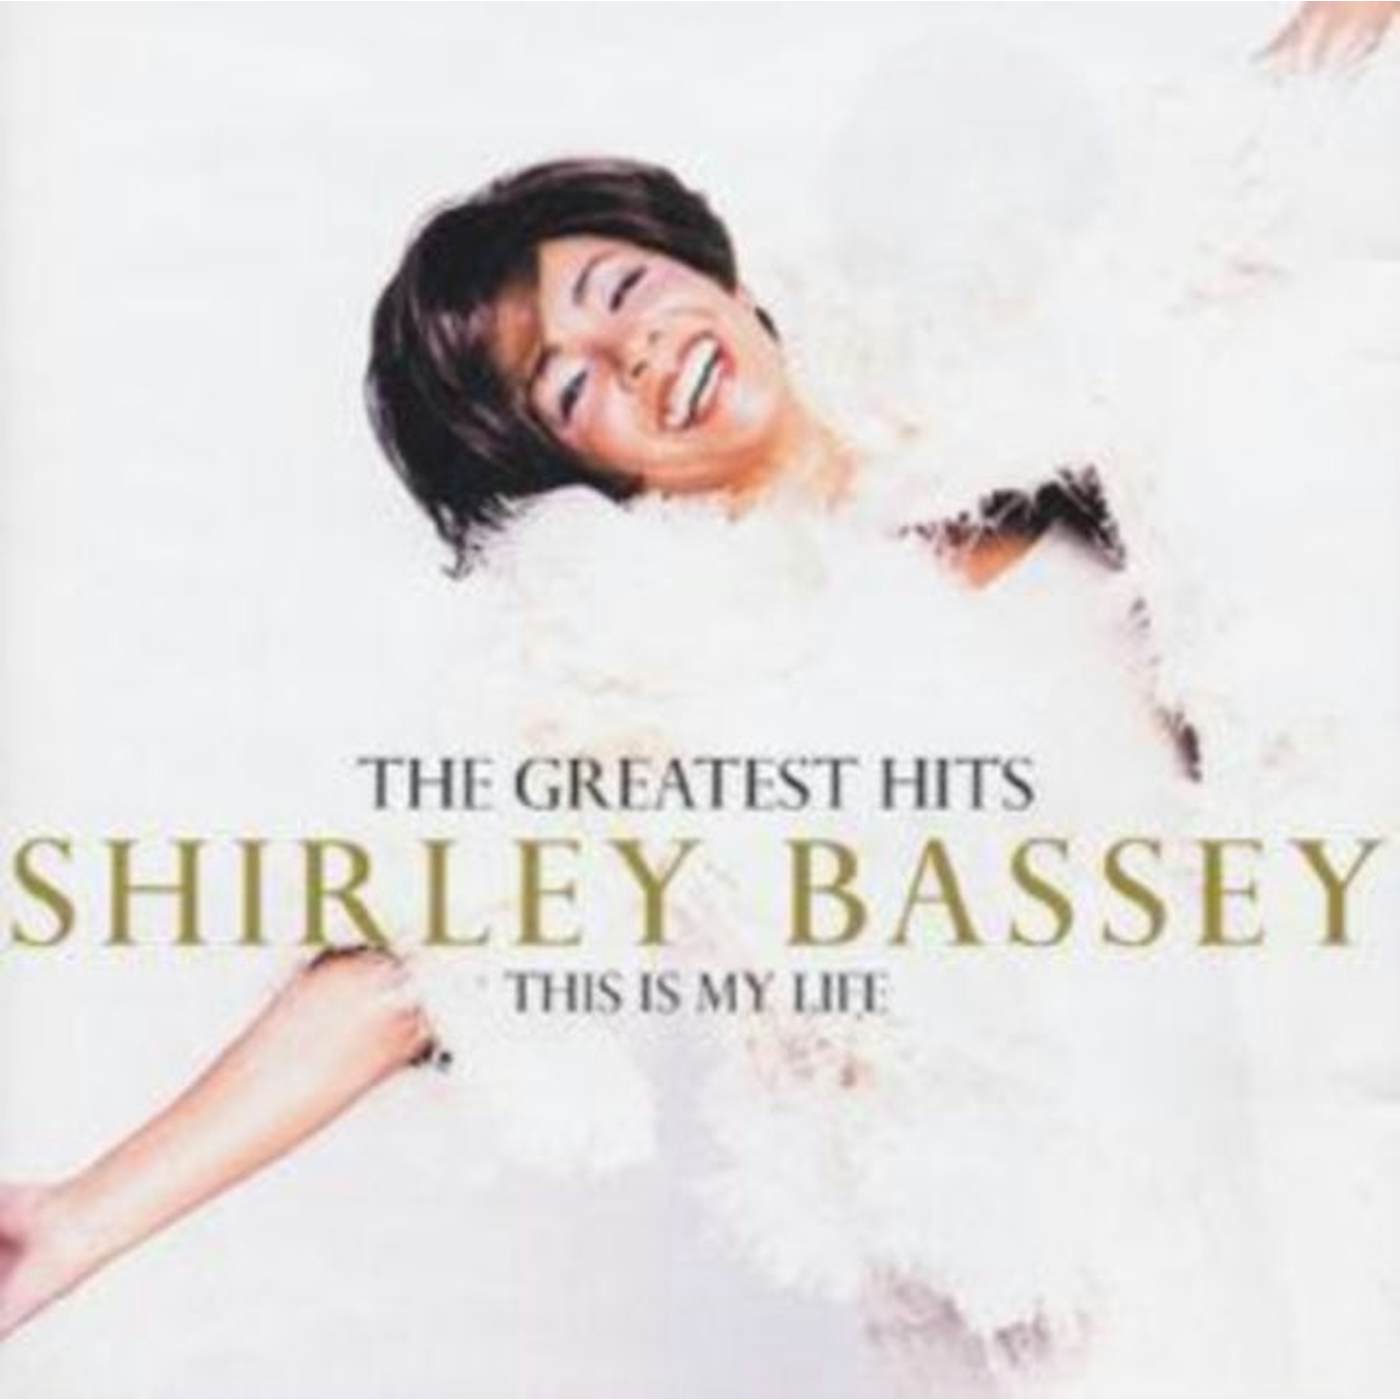 Shirley Bassey CD - This Is My Life - The Greatest Hits